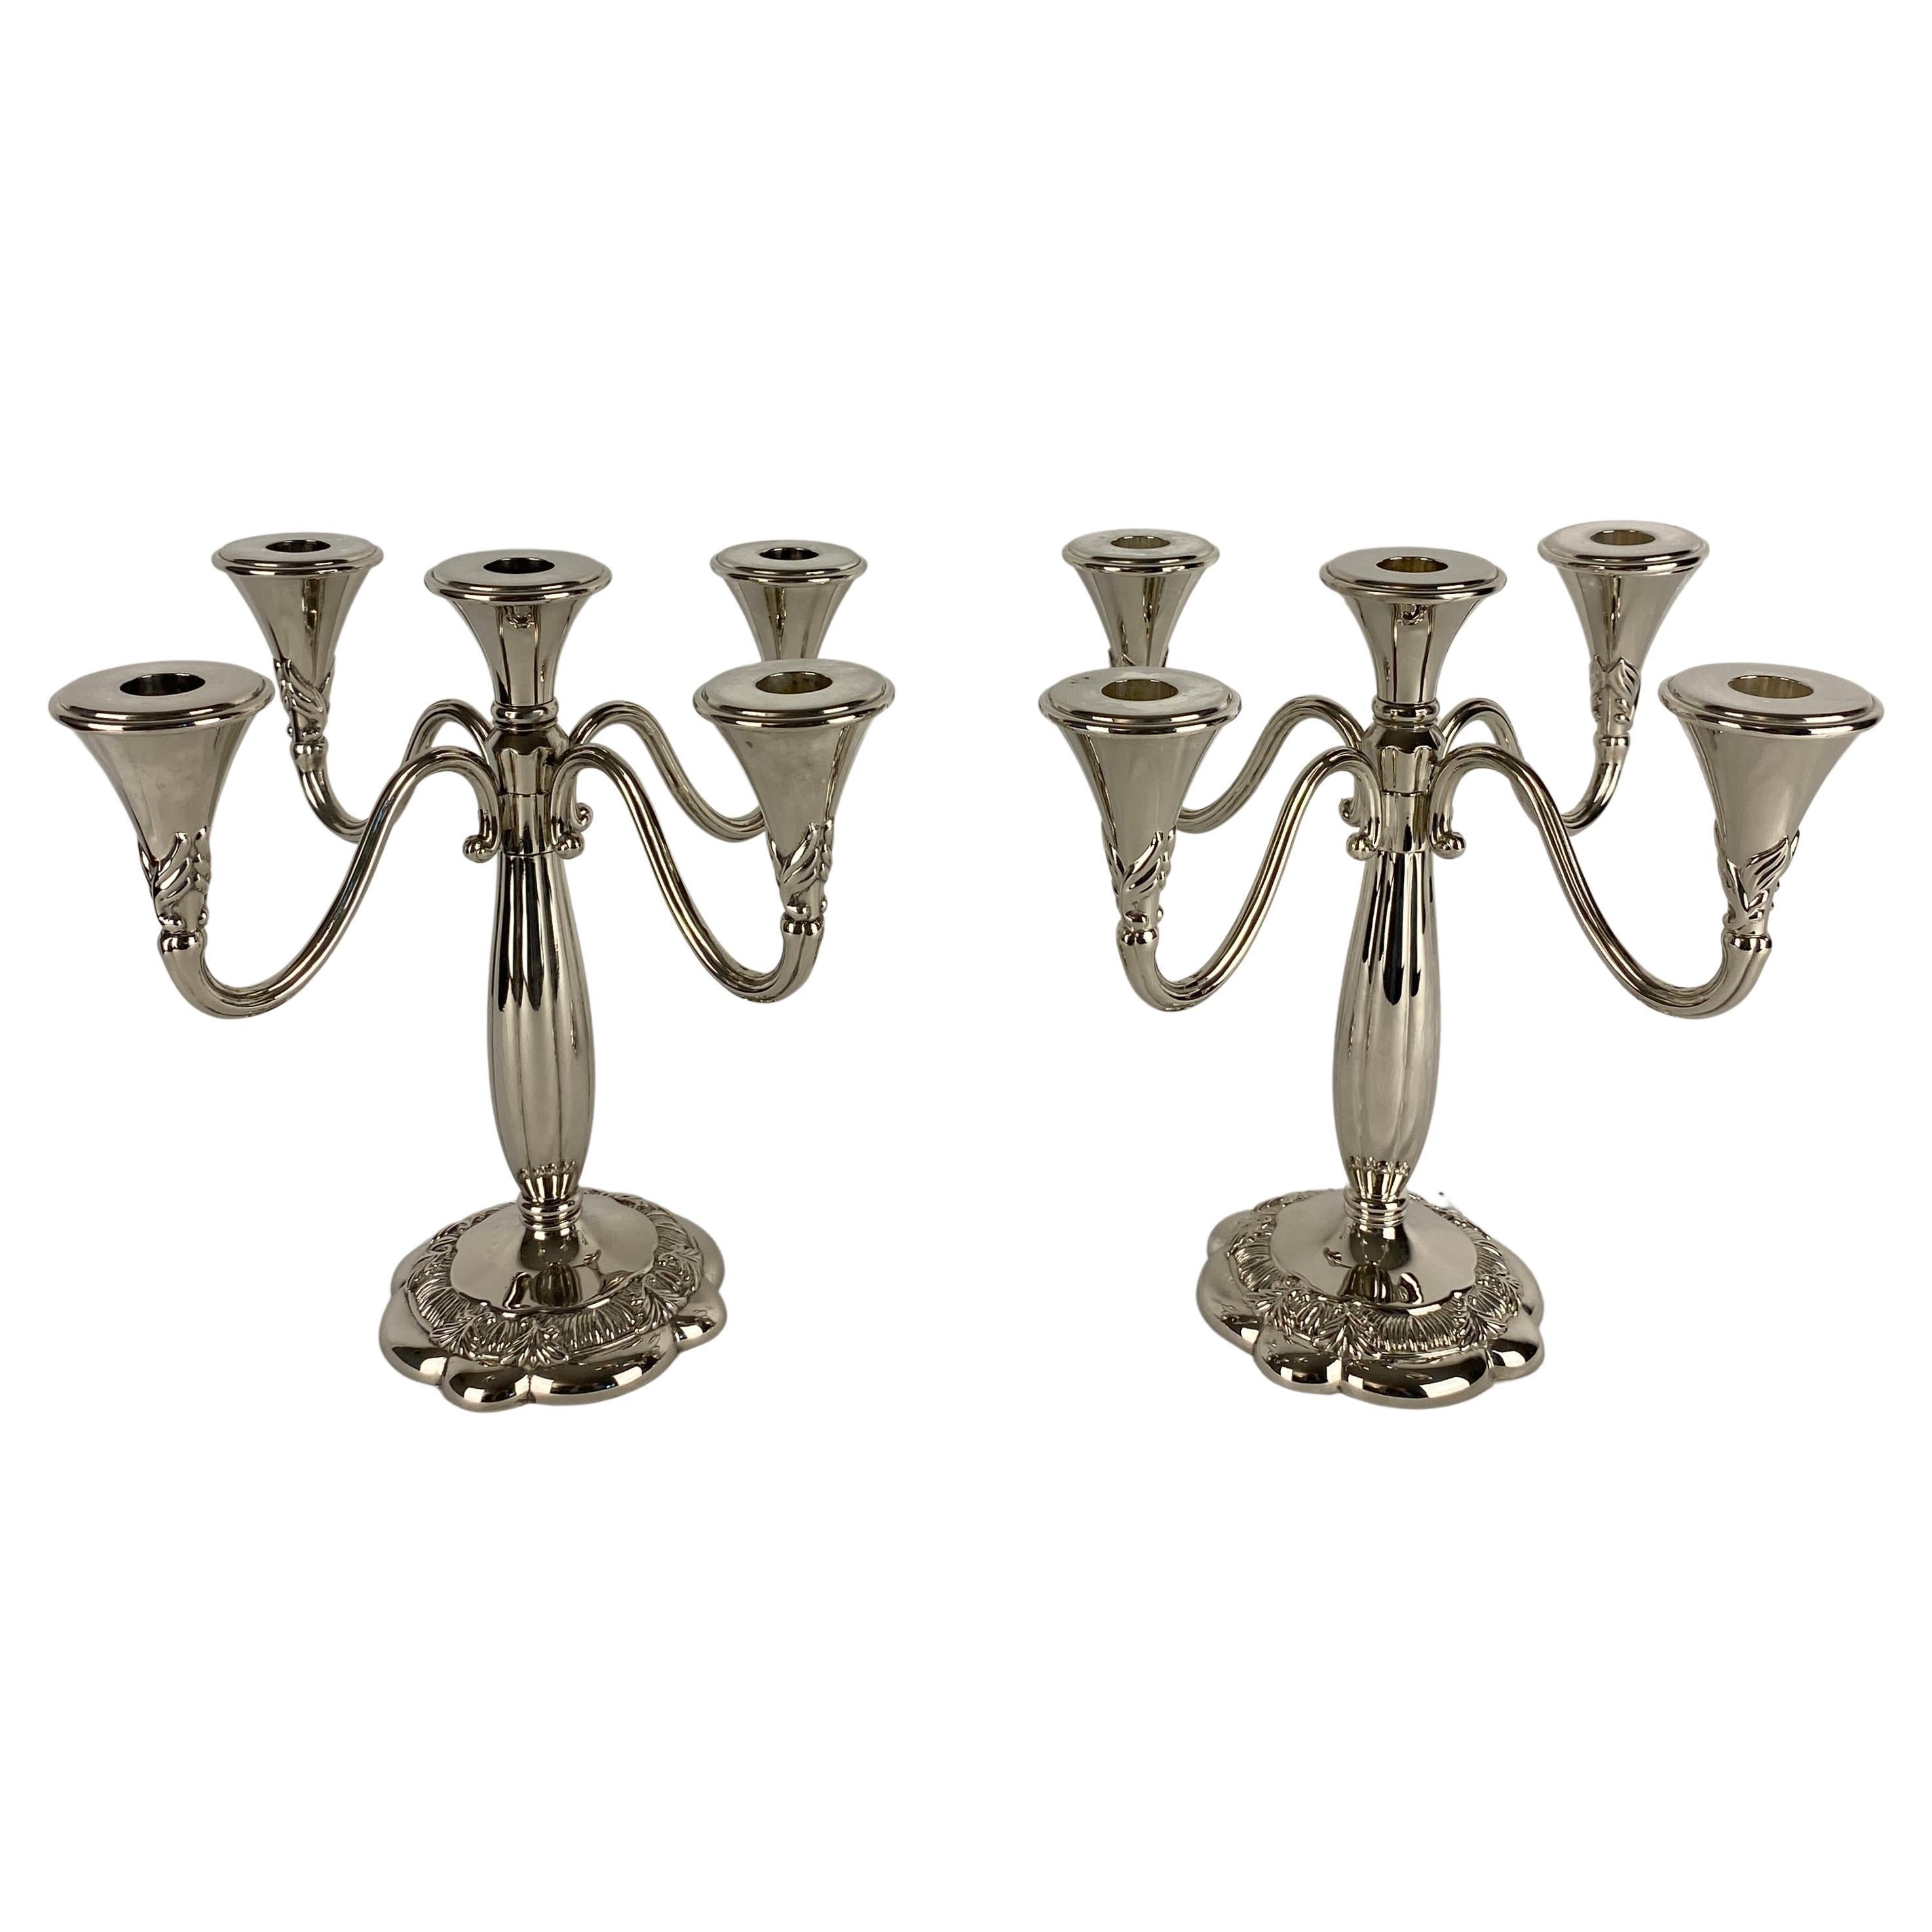 Pair of Art Deco Style Silver Plated Candelabras by Royal Gallery